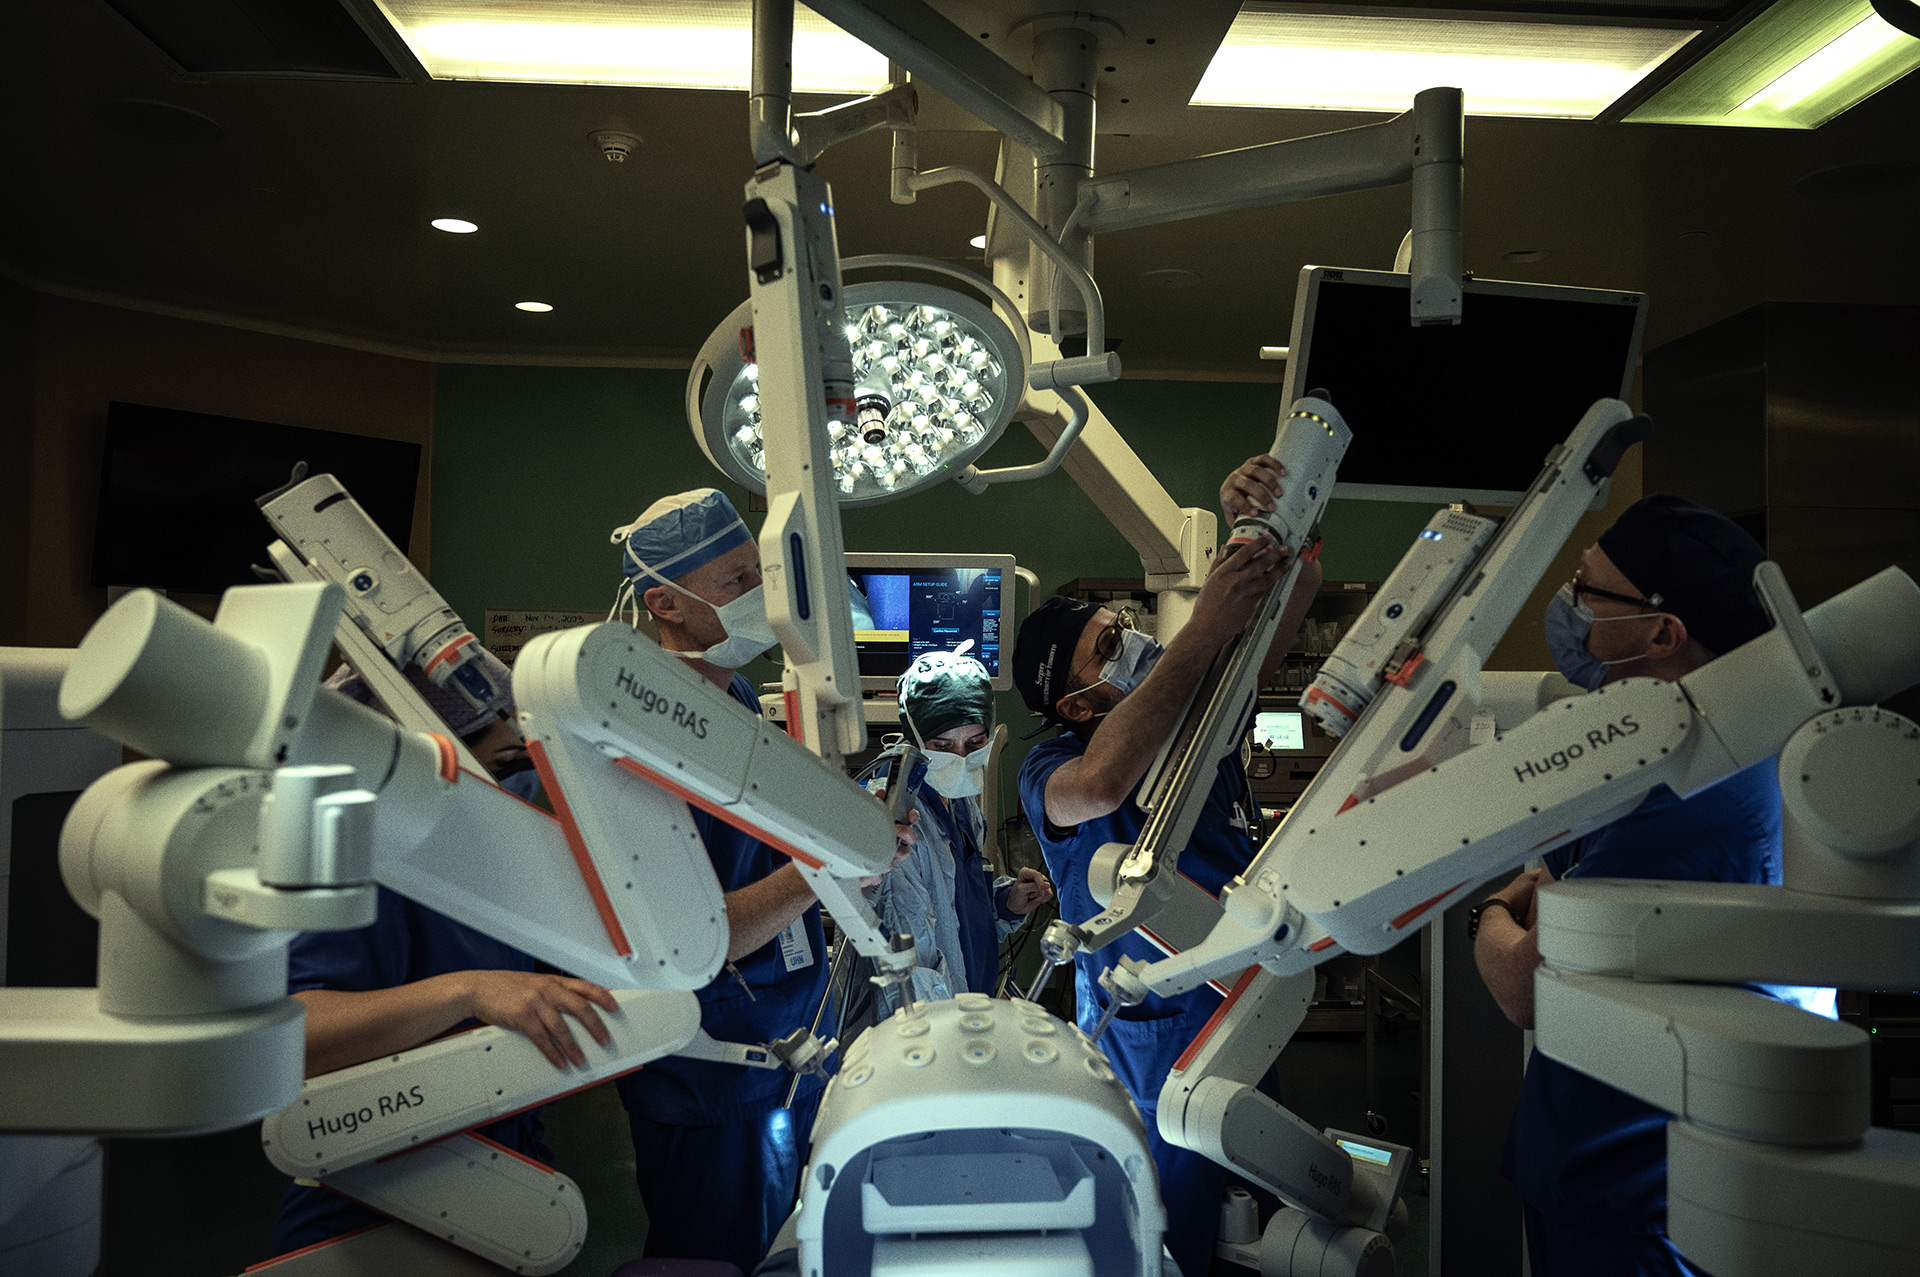 The surgical team preparing a surgical robot, Hugo, for a training session.